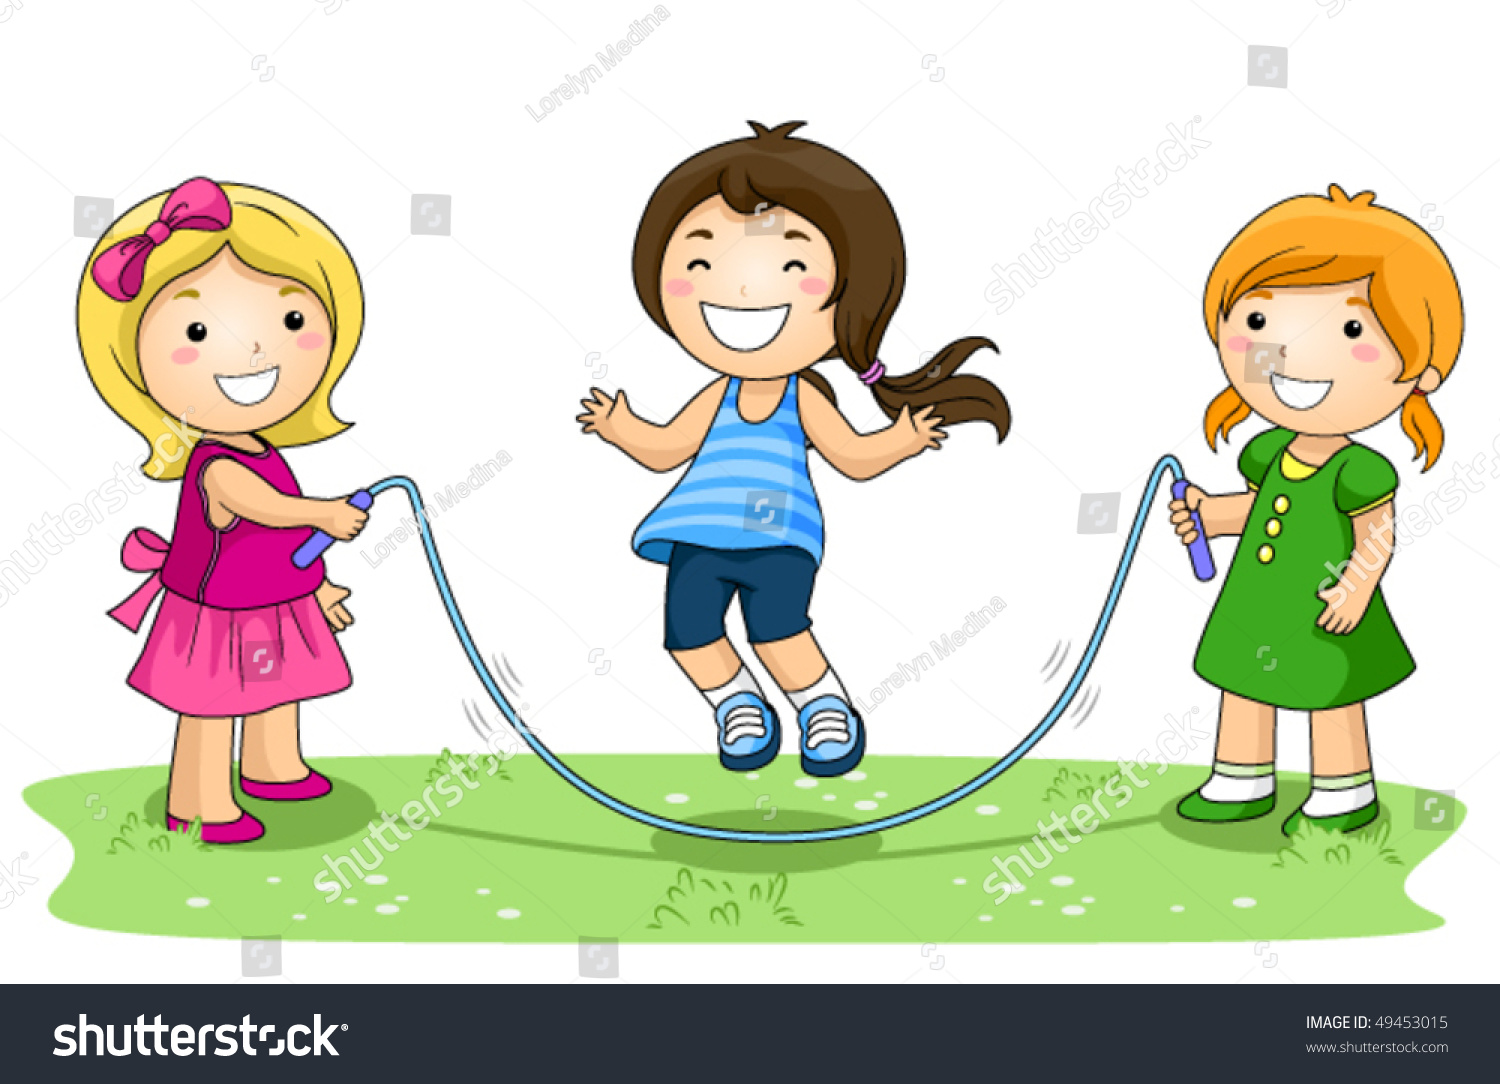 stock-vector-children-playing-jumping-rope-in-the-park-vector-49453015.jpg (1500×1085)